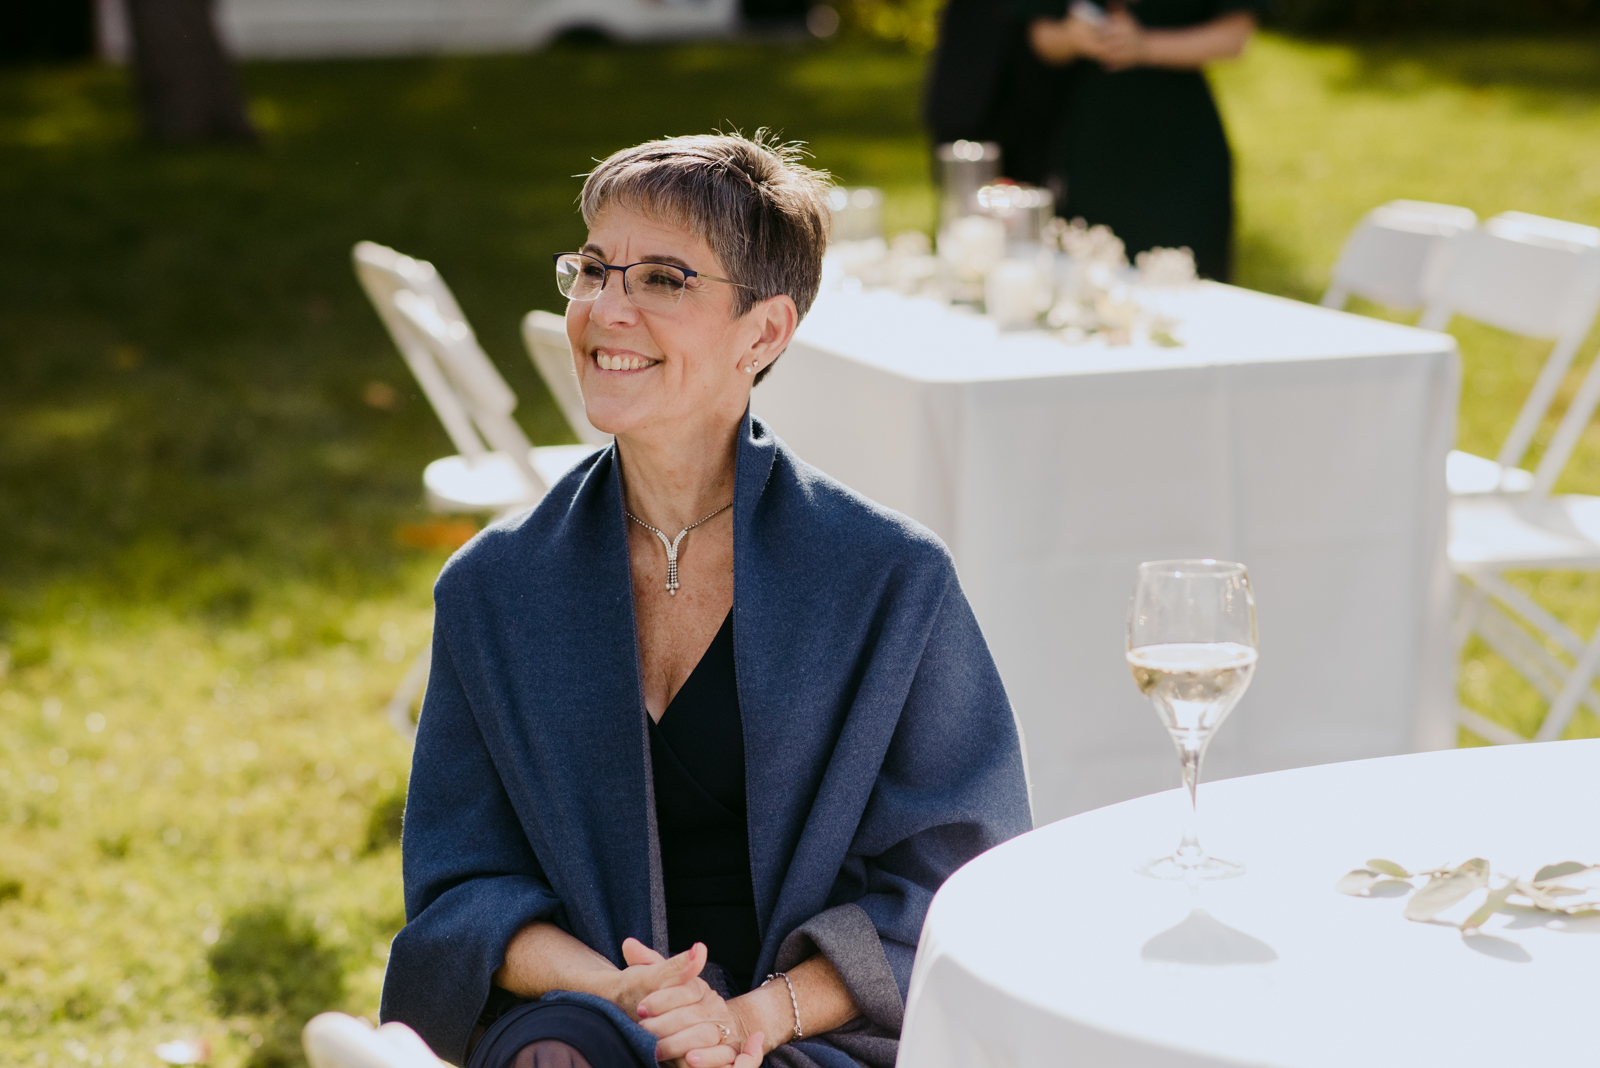 mother of the bride smiling during speeches at outdoor wedding reception